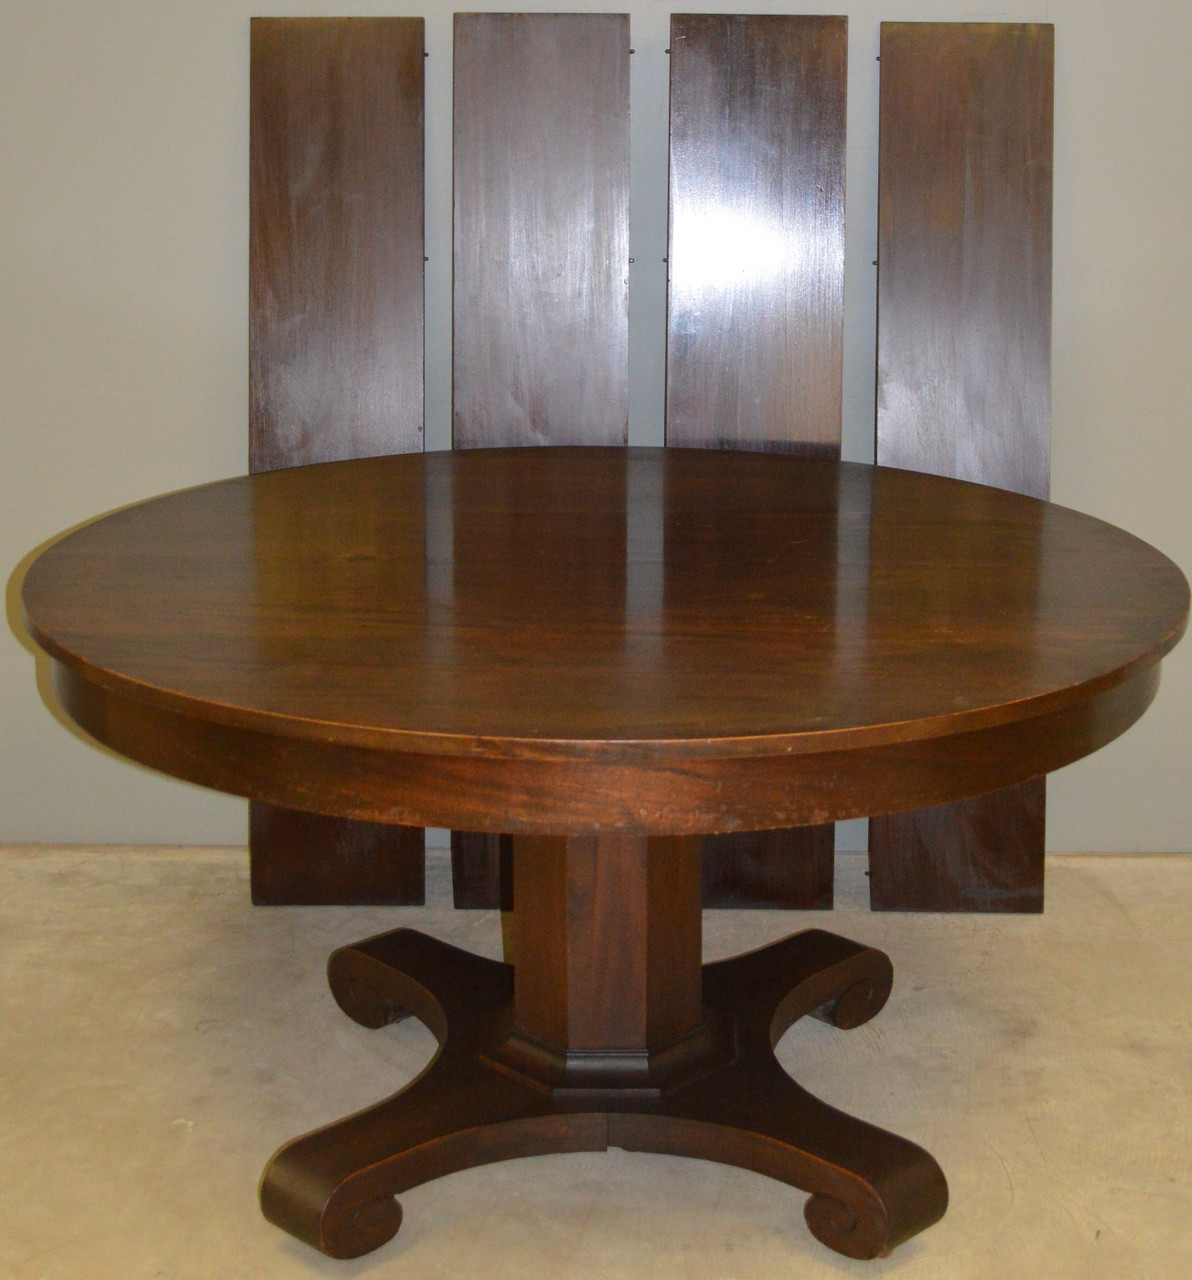 Sold Mahogany Empire 54 Inch Round Dining Table With 4 Factory Leaves In Crate Maine Antique Furniture